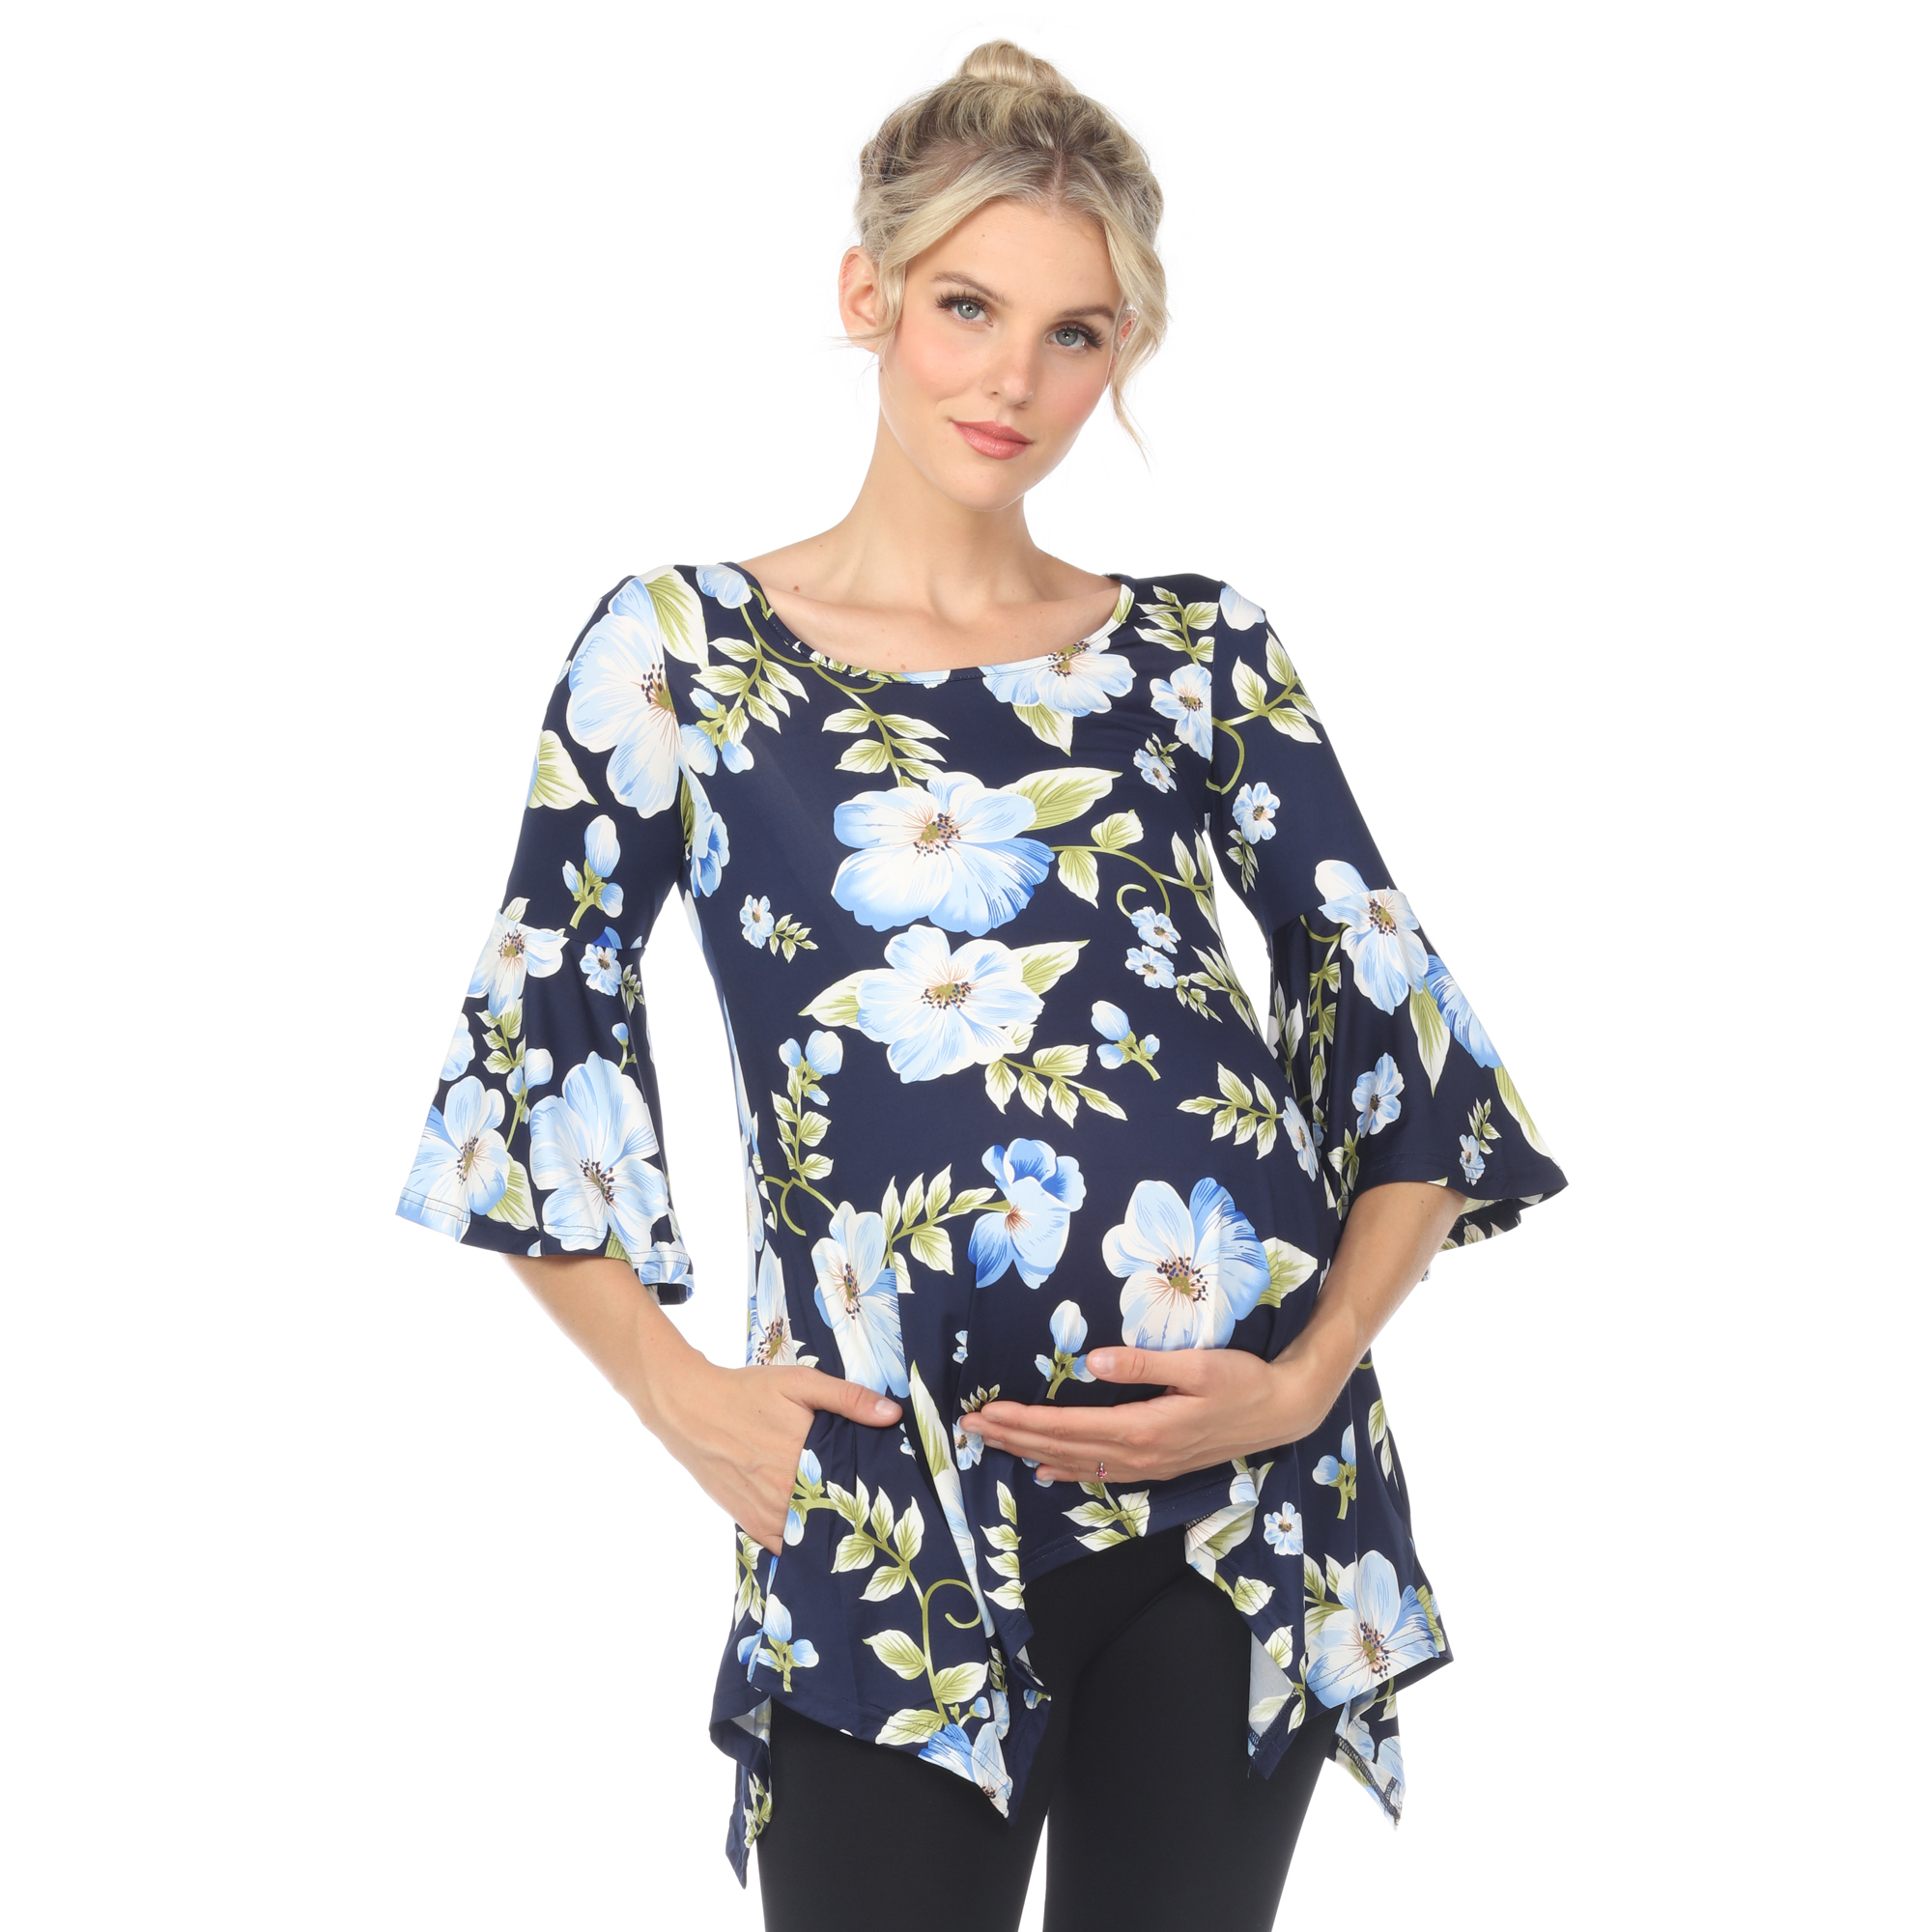 White Mark Women's Maternity Floral Print Quarter Sleeve Tunic Top With Pockets - Blue Flower, Medium